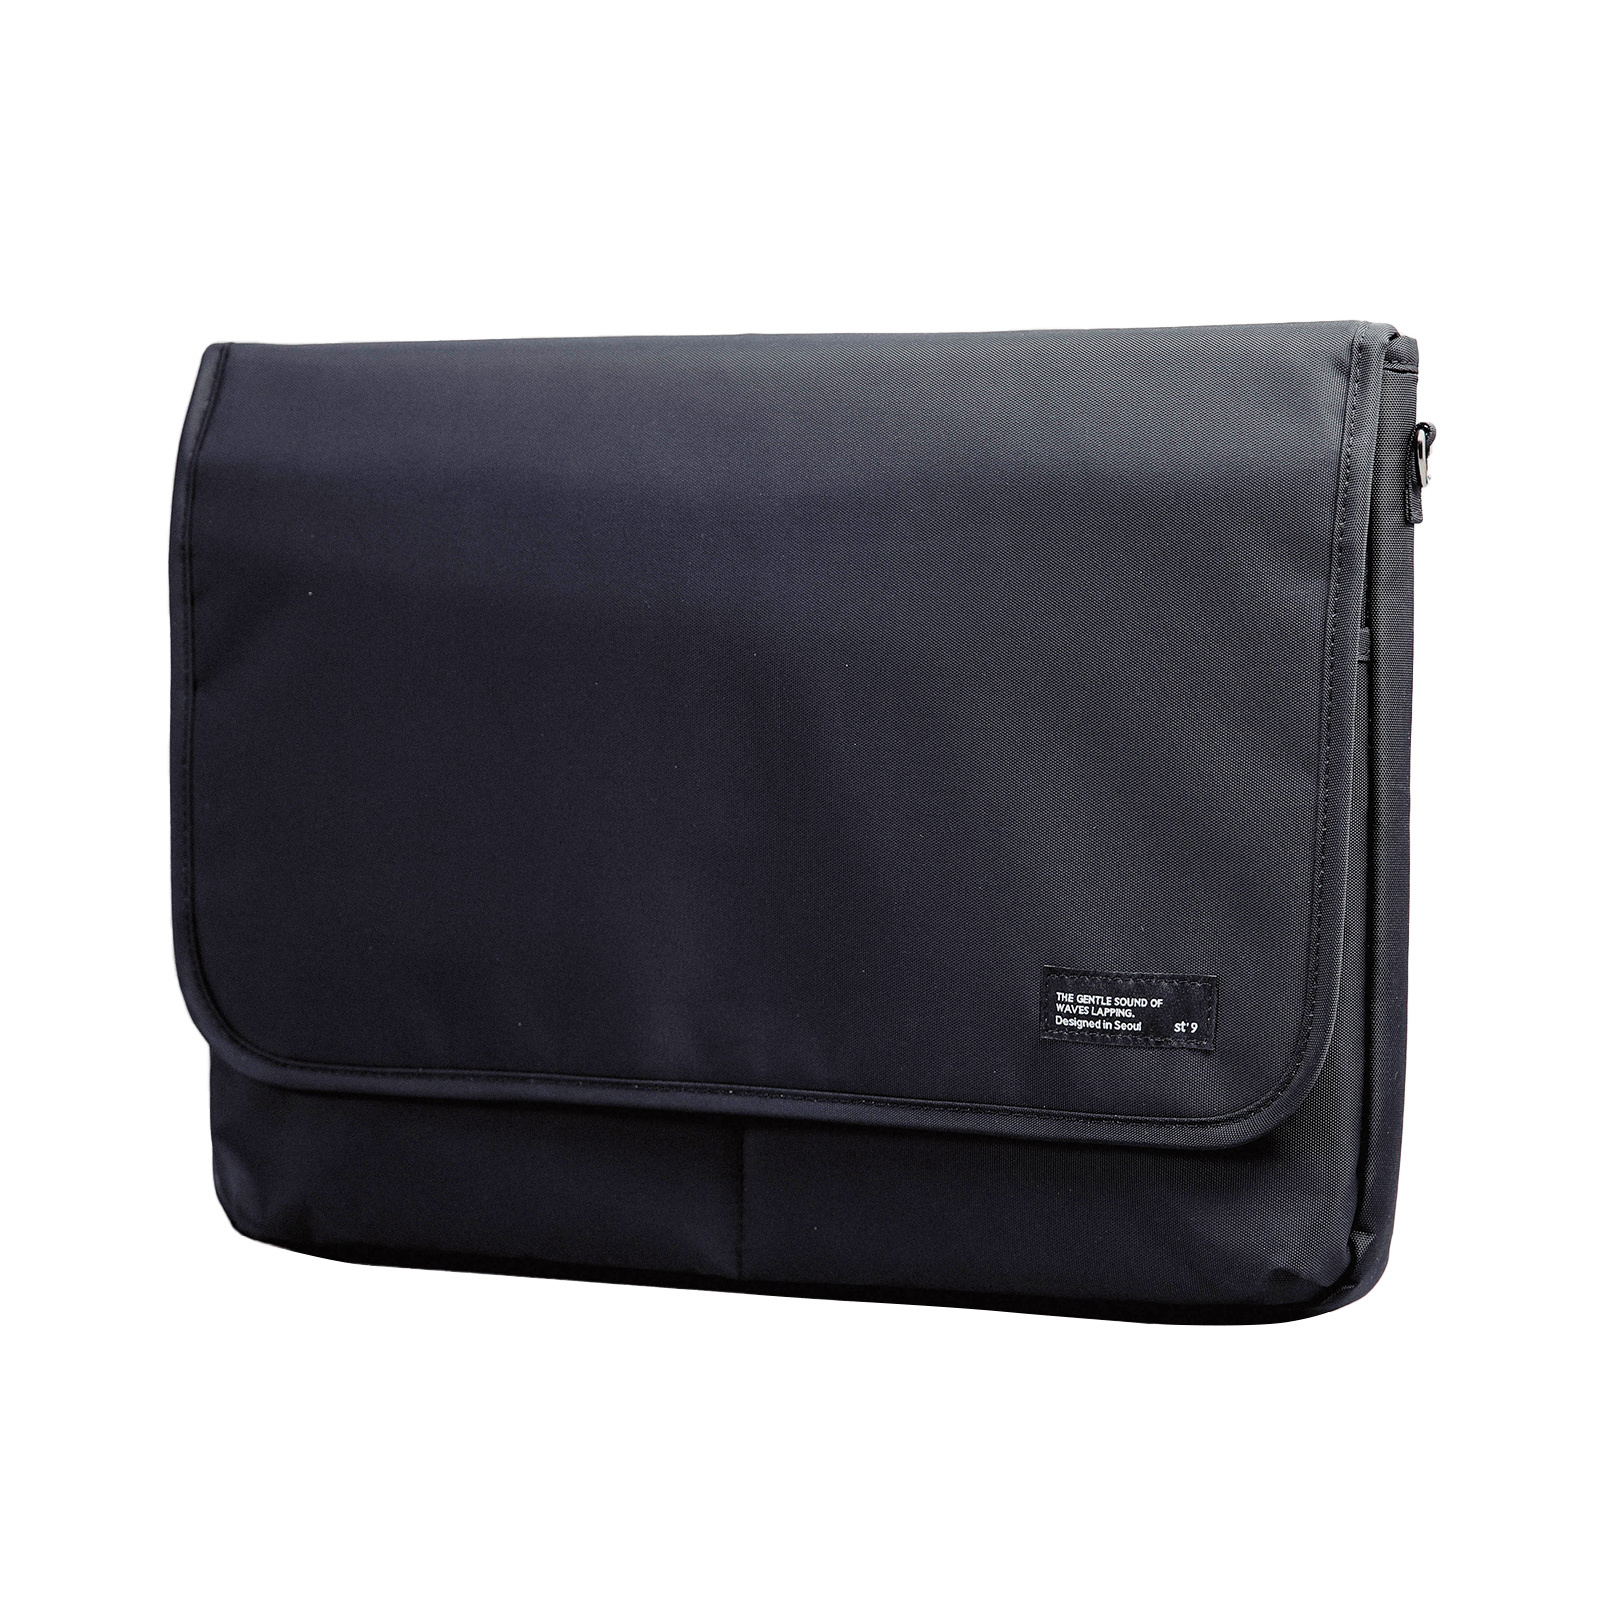 Large 15/15.6 inch Laptop Sleeve with Strap LATO - BLACK 